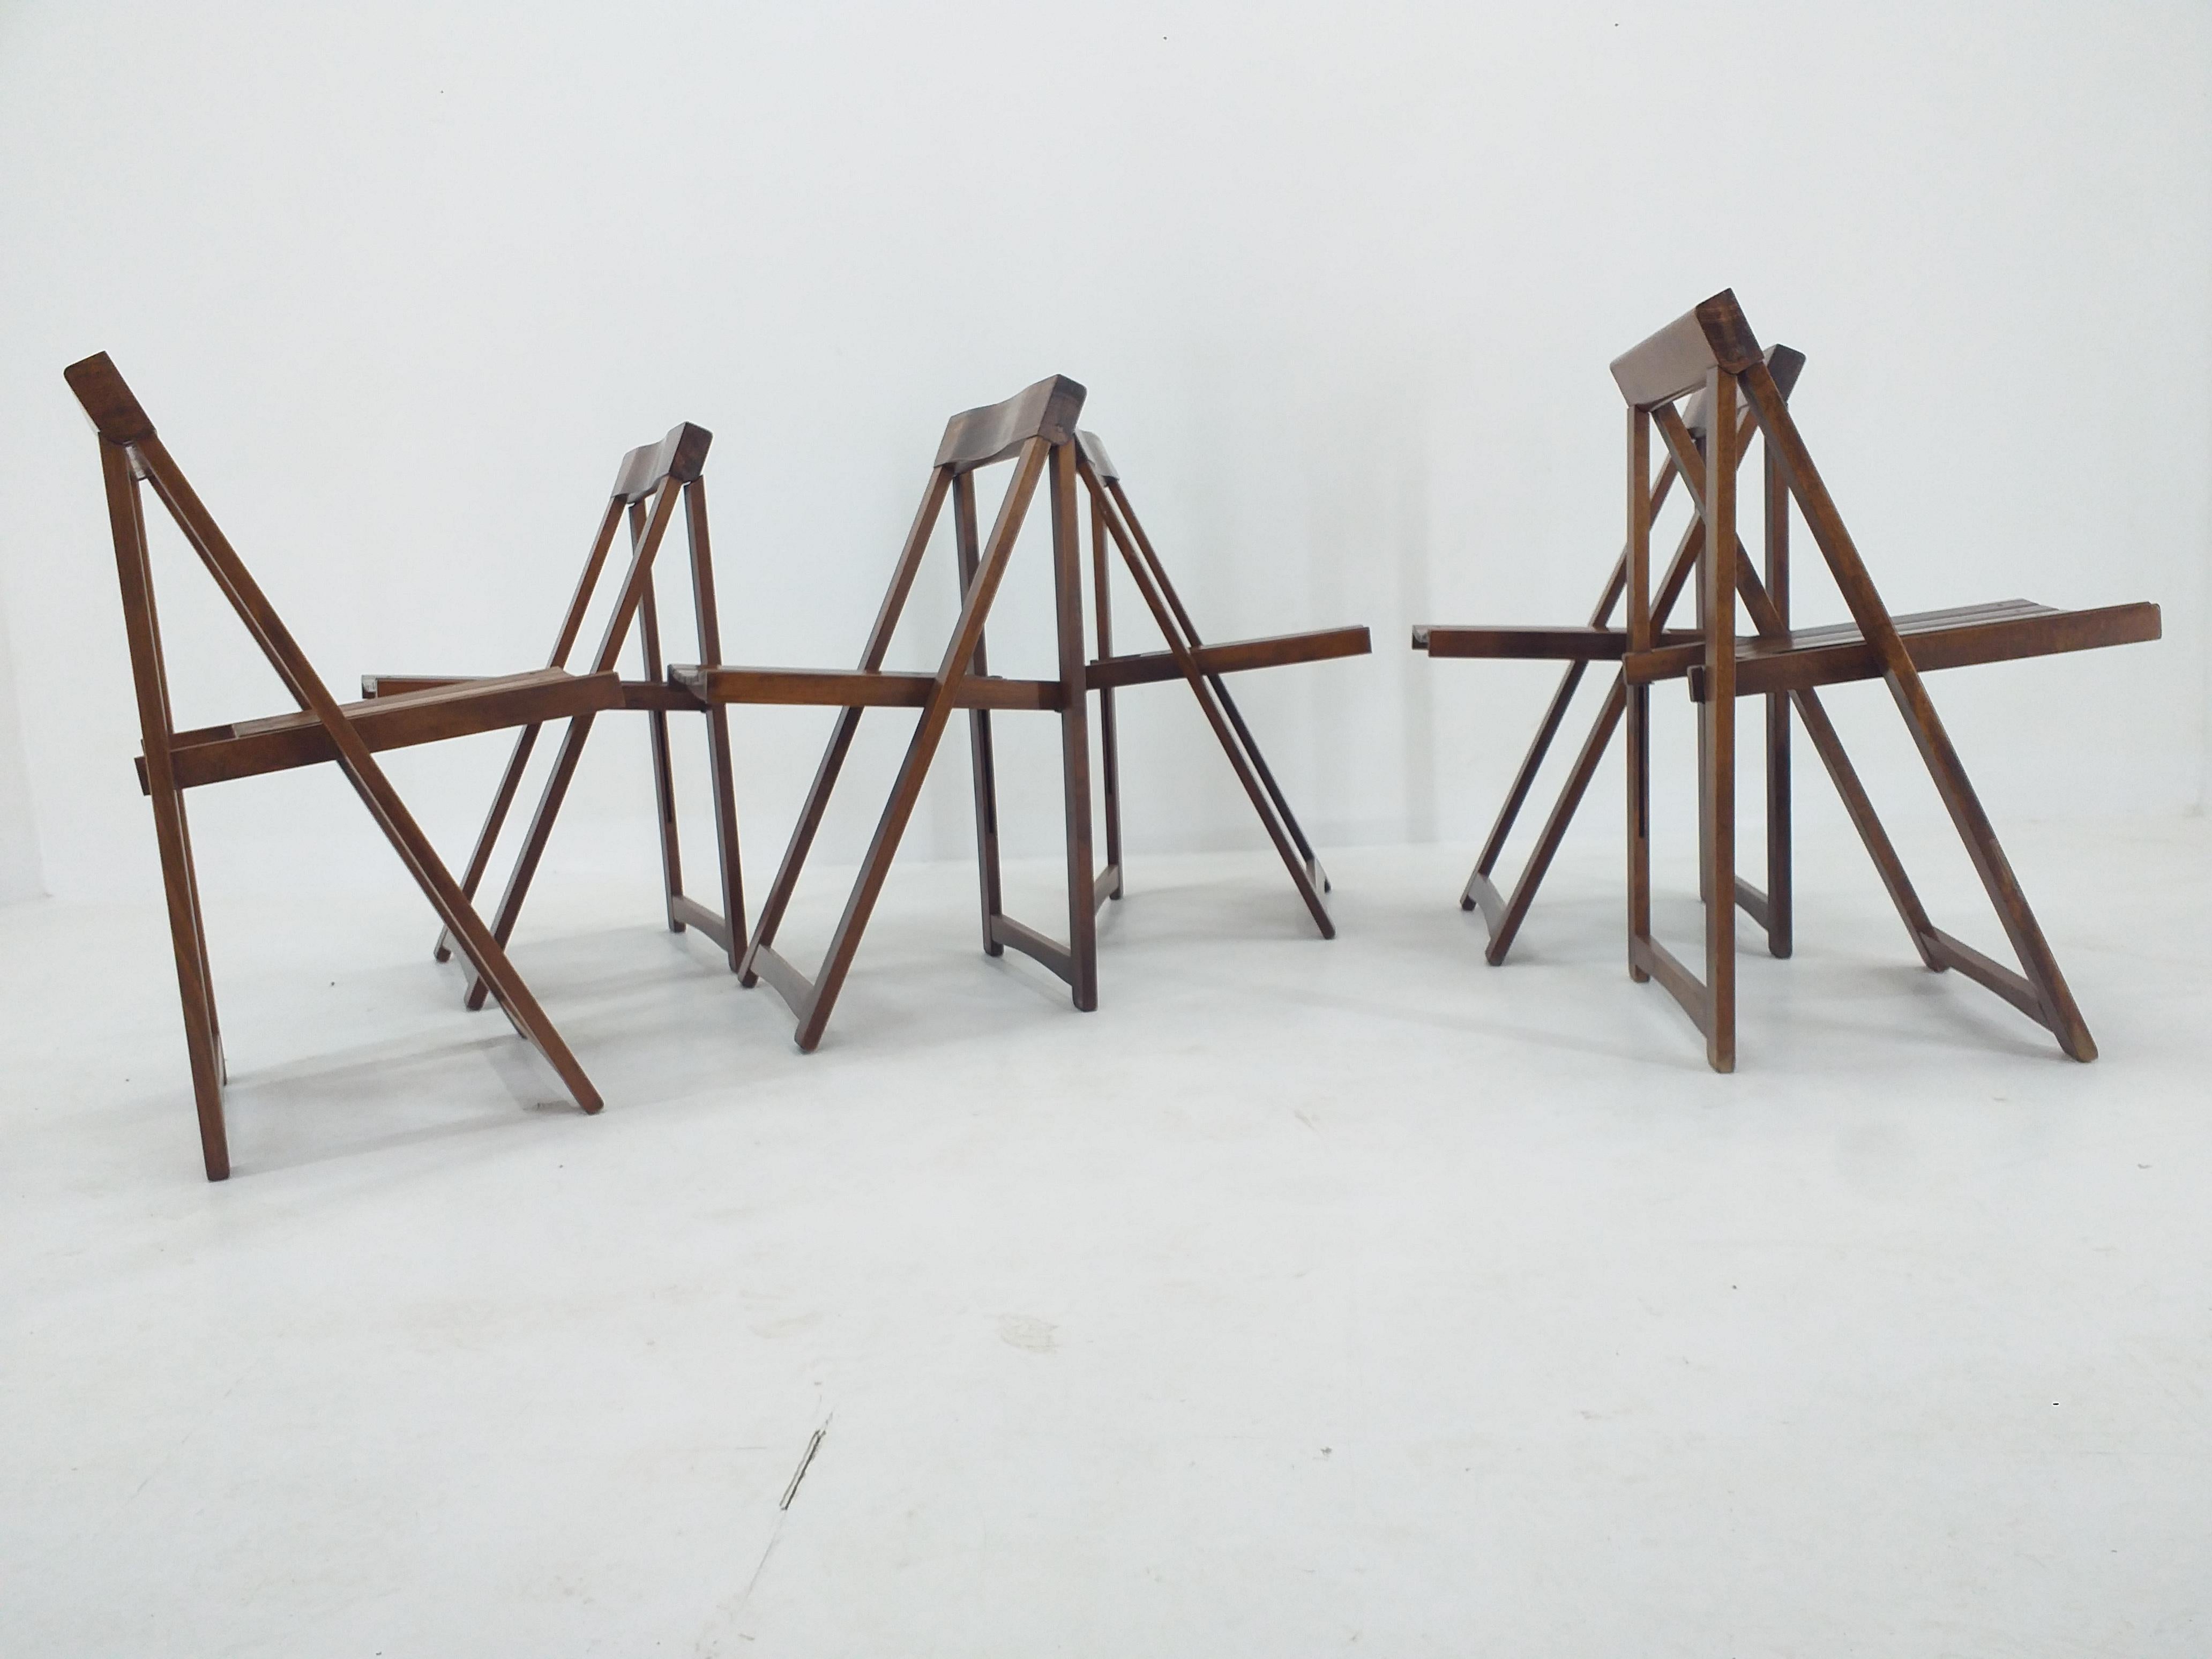 Wood Set of Six Mid Century Folding Chairs Aldo Jacober for Alberto Bazzani, 1960s For Sale